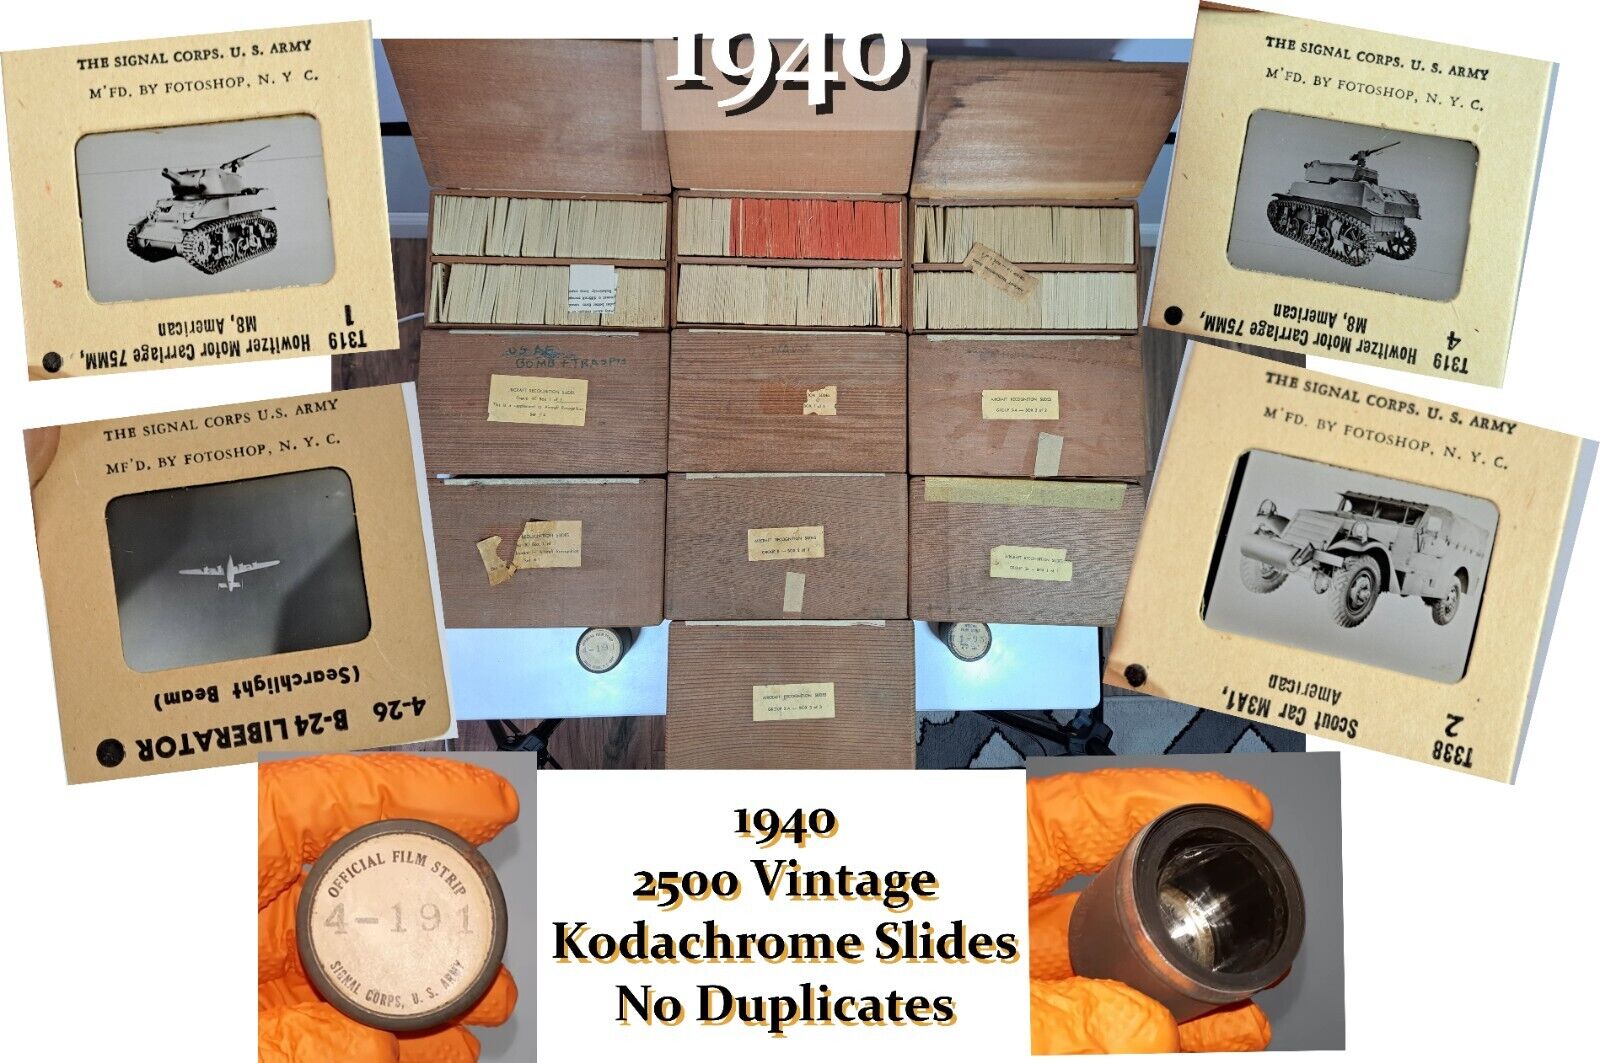 ***ATTENTION COLLECTORS** RARE WWII US Army Kodachrome Slides 2500pcs 35mm 1940s